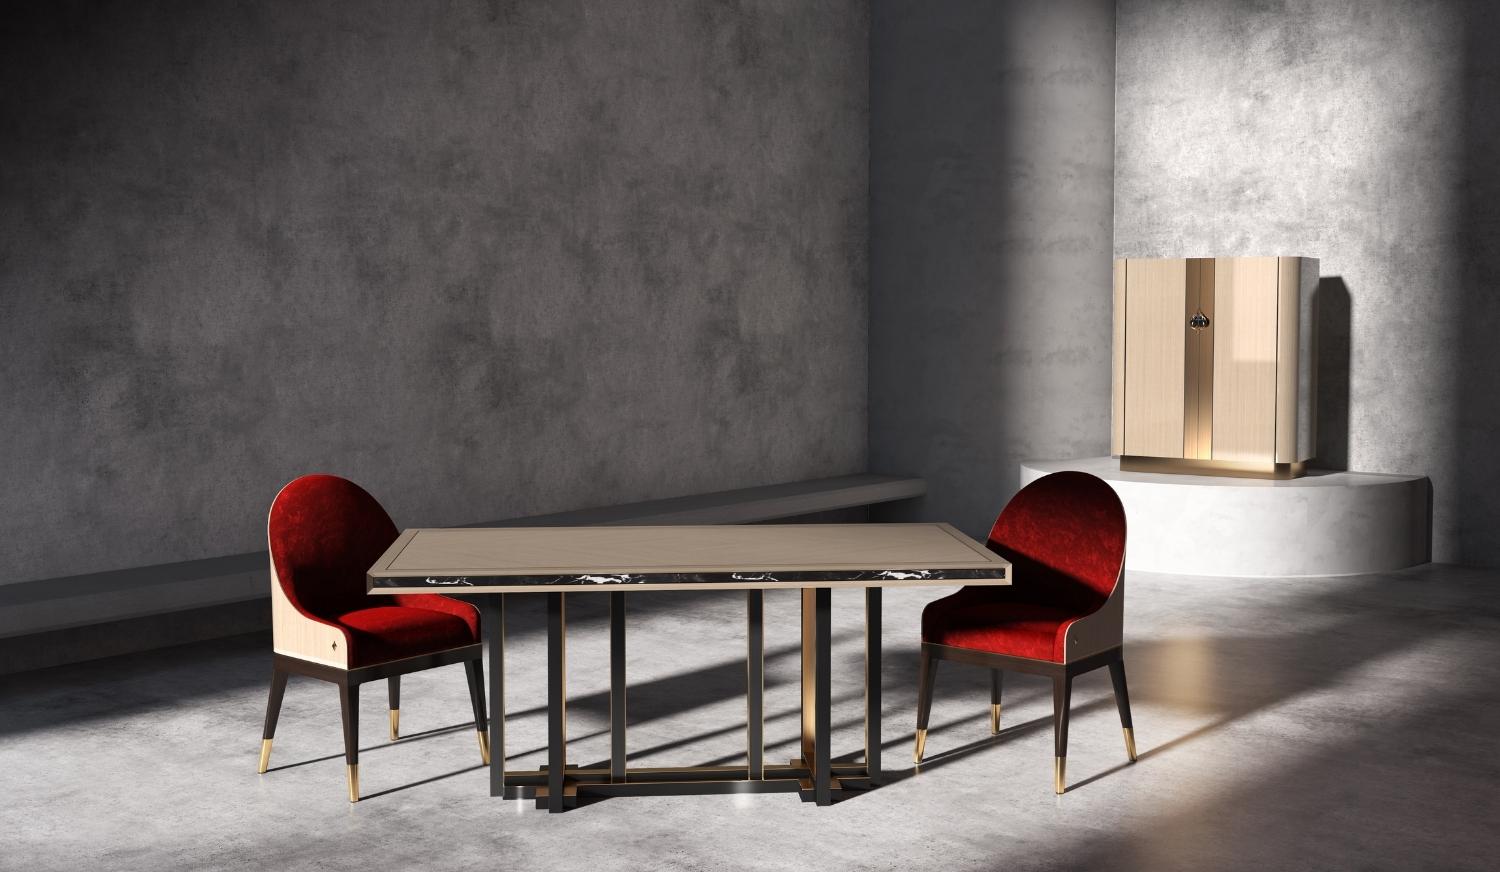 MOROSI Dining Table Chairs Plus Bodd Bar Cabinet By Marano Furniture 1, Design Authority